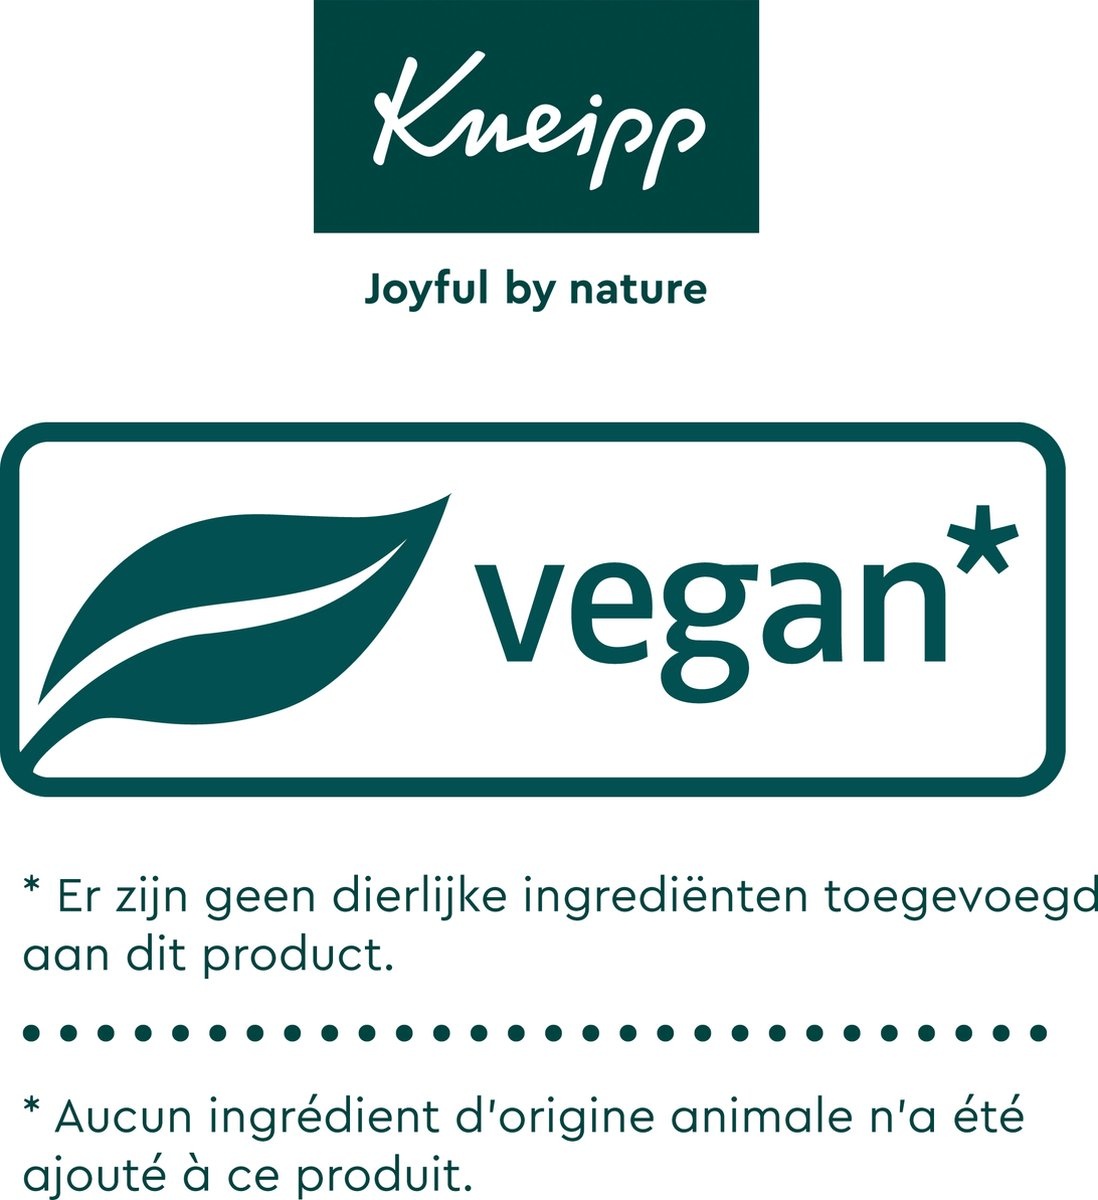 Kneipp Good Night - Gift set - Swiss pine and Amyris - Vegan - Contents: 75 ml + 2x 20 ml and 1 sheet mask - Packaging damaged